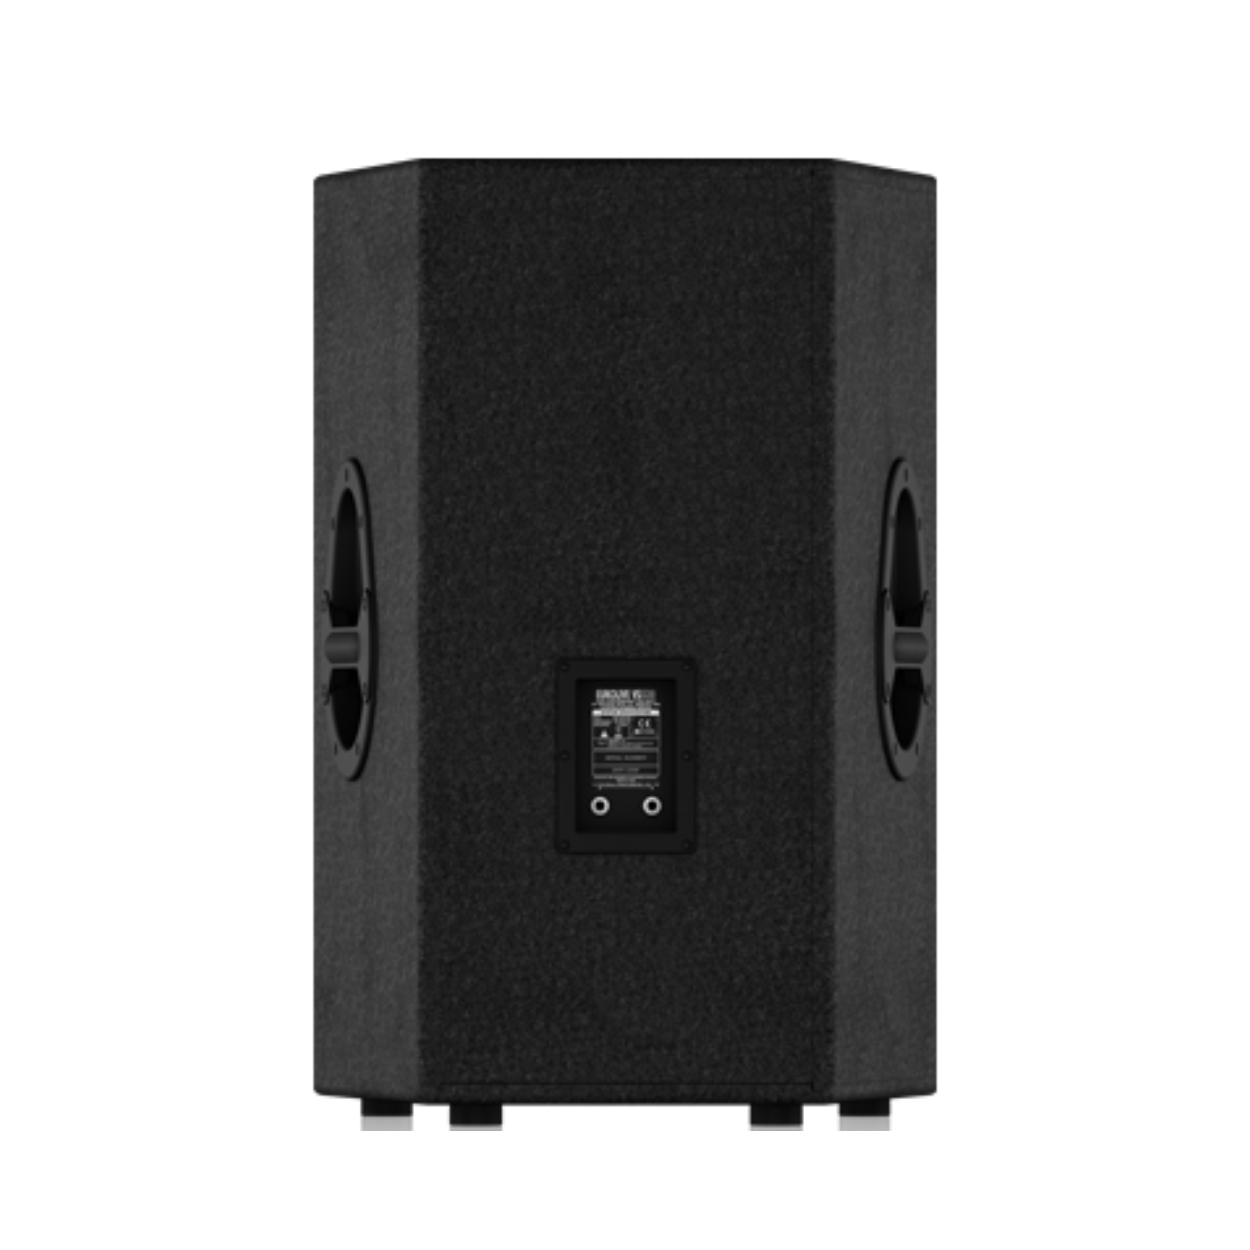 BEHRINGER 150W @ 8 OHMS 2-WAY WITH 15" WOOFER AND DUAL ELECTRO-DYANAMIC DRIVER SPEAKER | BEHRINGER , Zoso Music